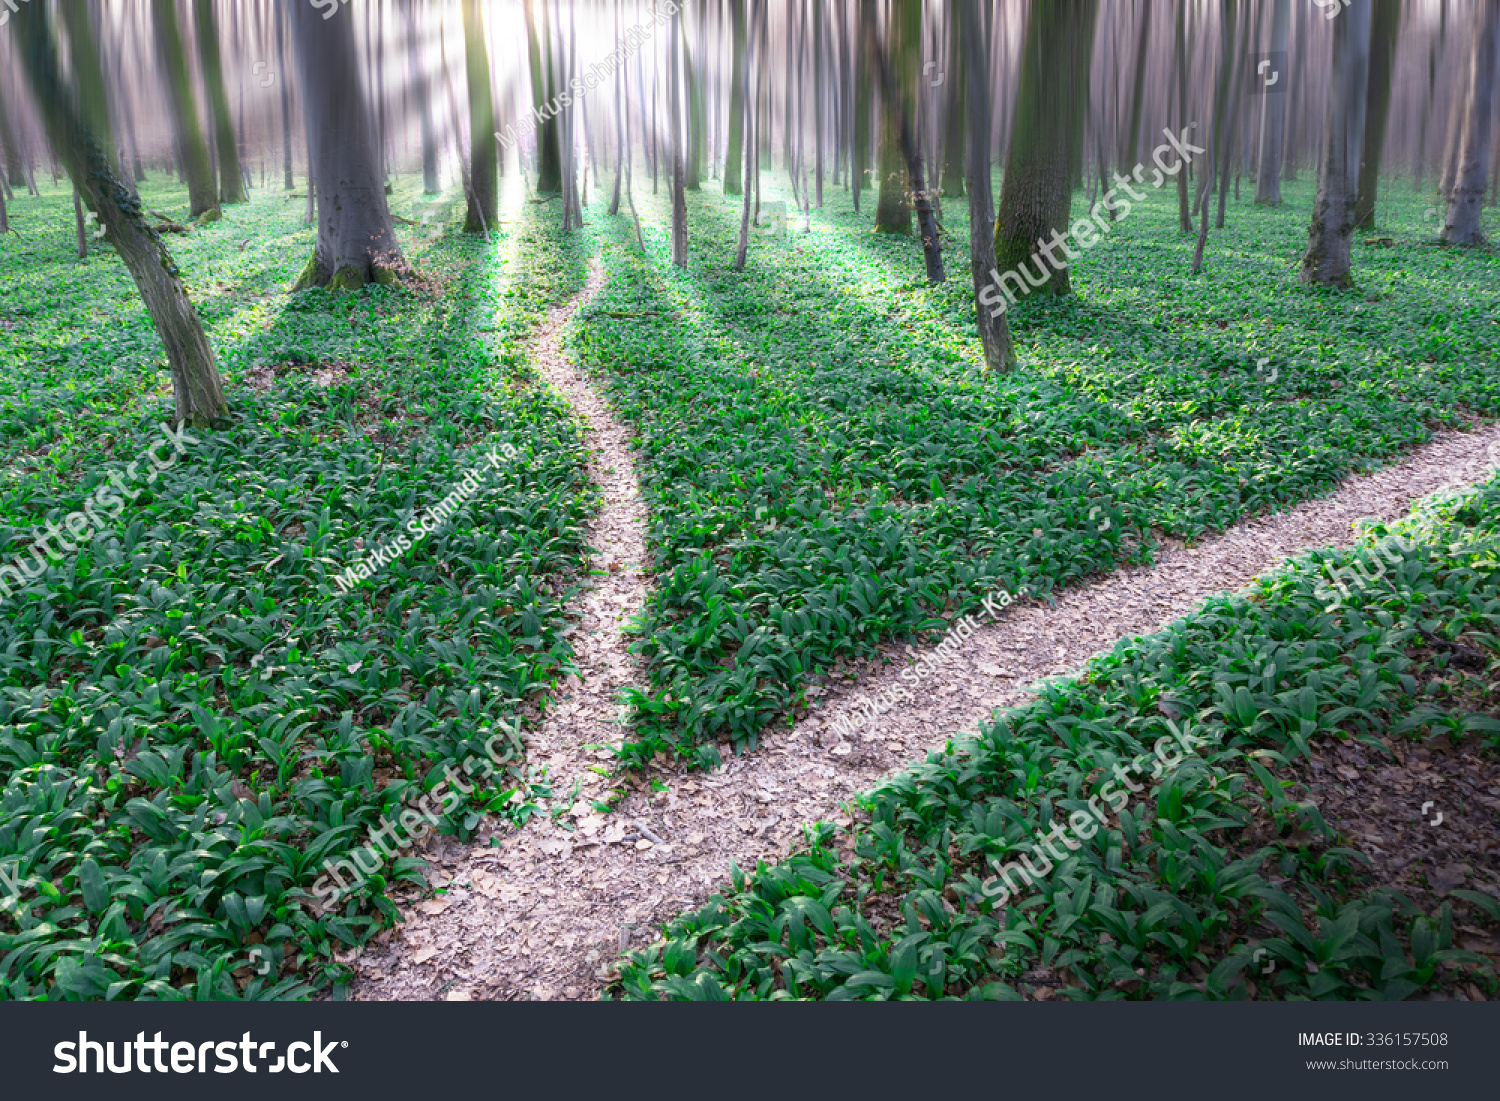 stock-photo-bifurcation-of-a-path-in-forrest-336157508.jpg